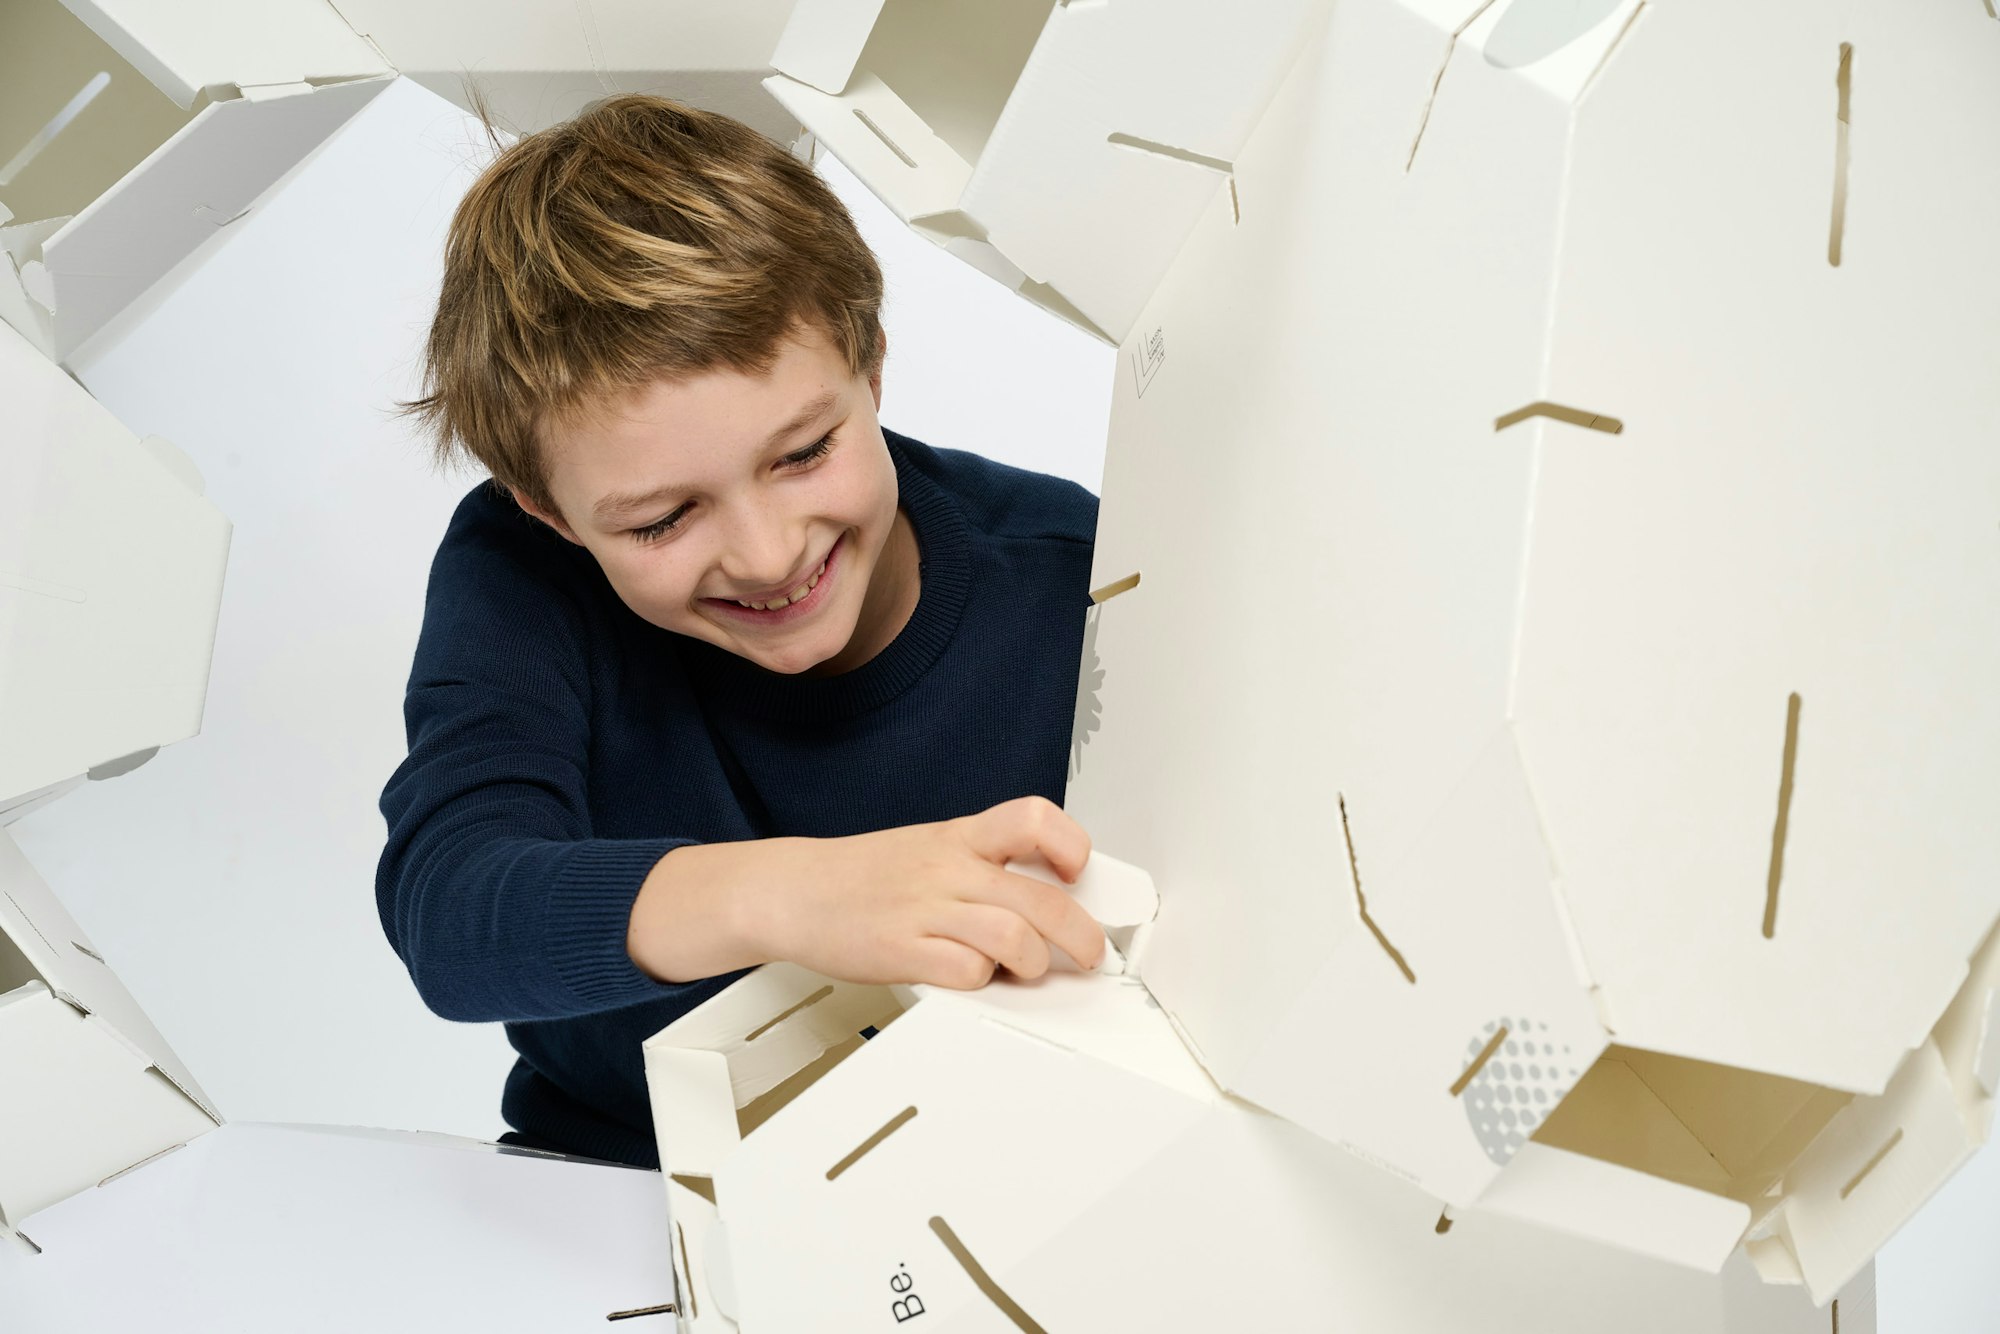 A young person working on a large white cardboard structure